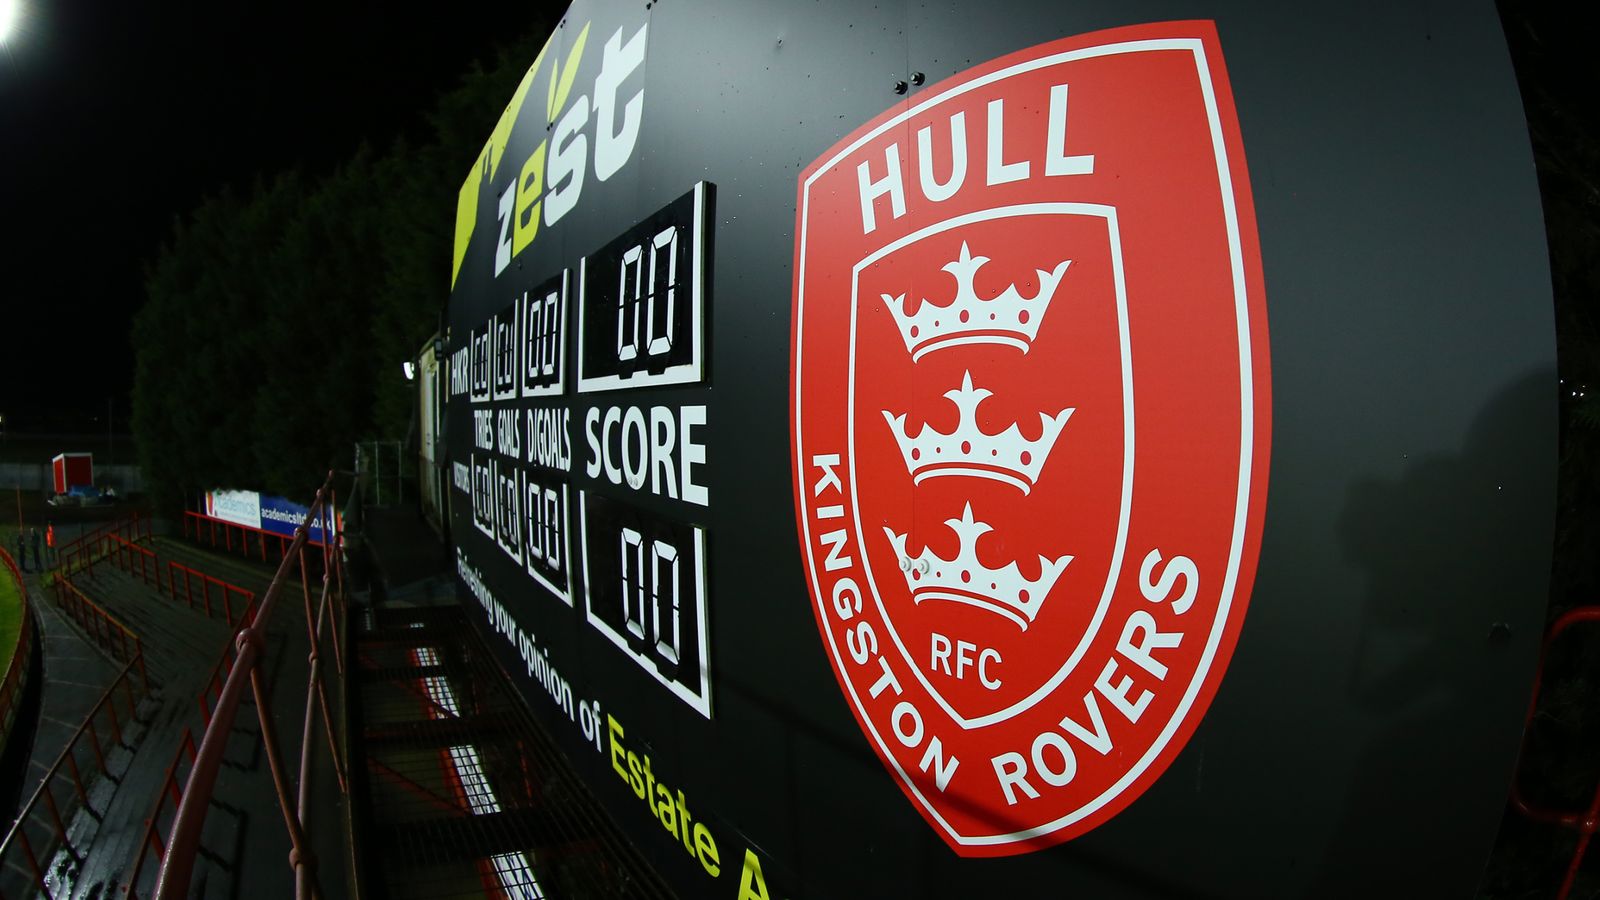 Hull Kingston Rovers fined £4,000 over homophobic chanting by supporters at home games